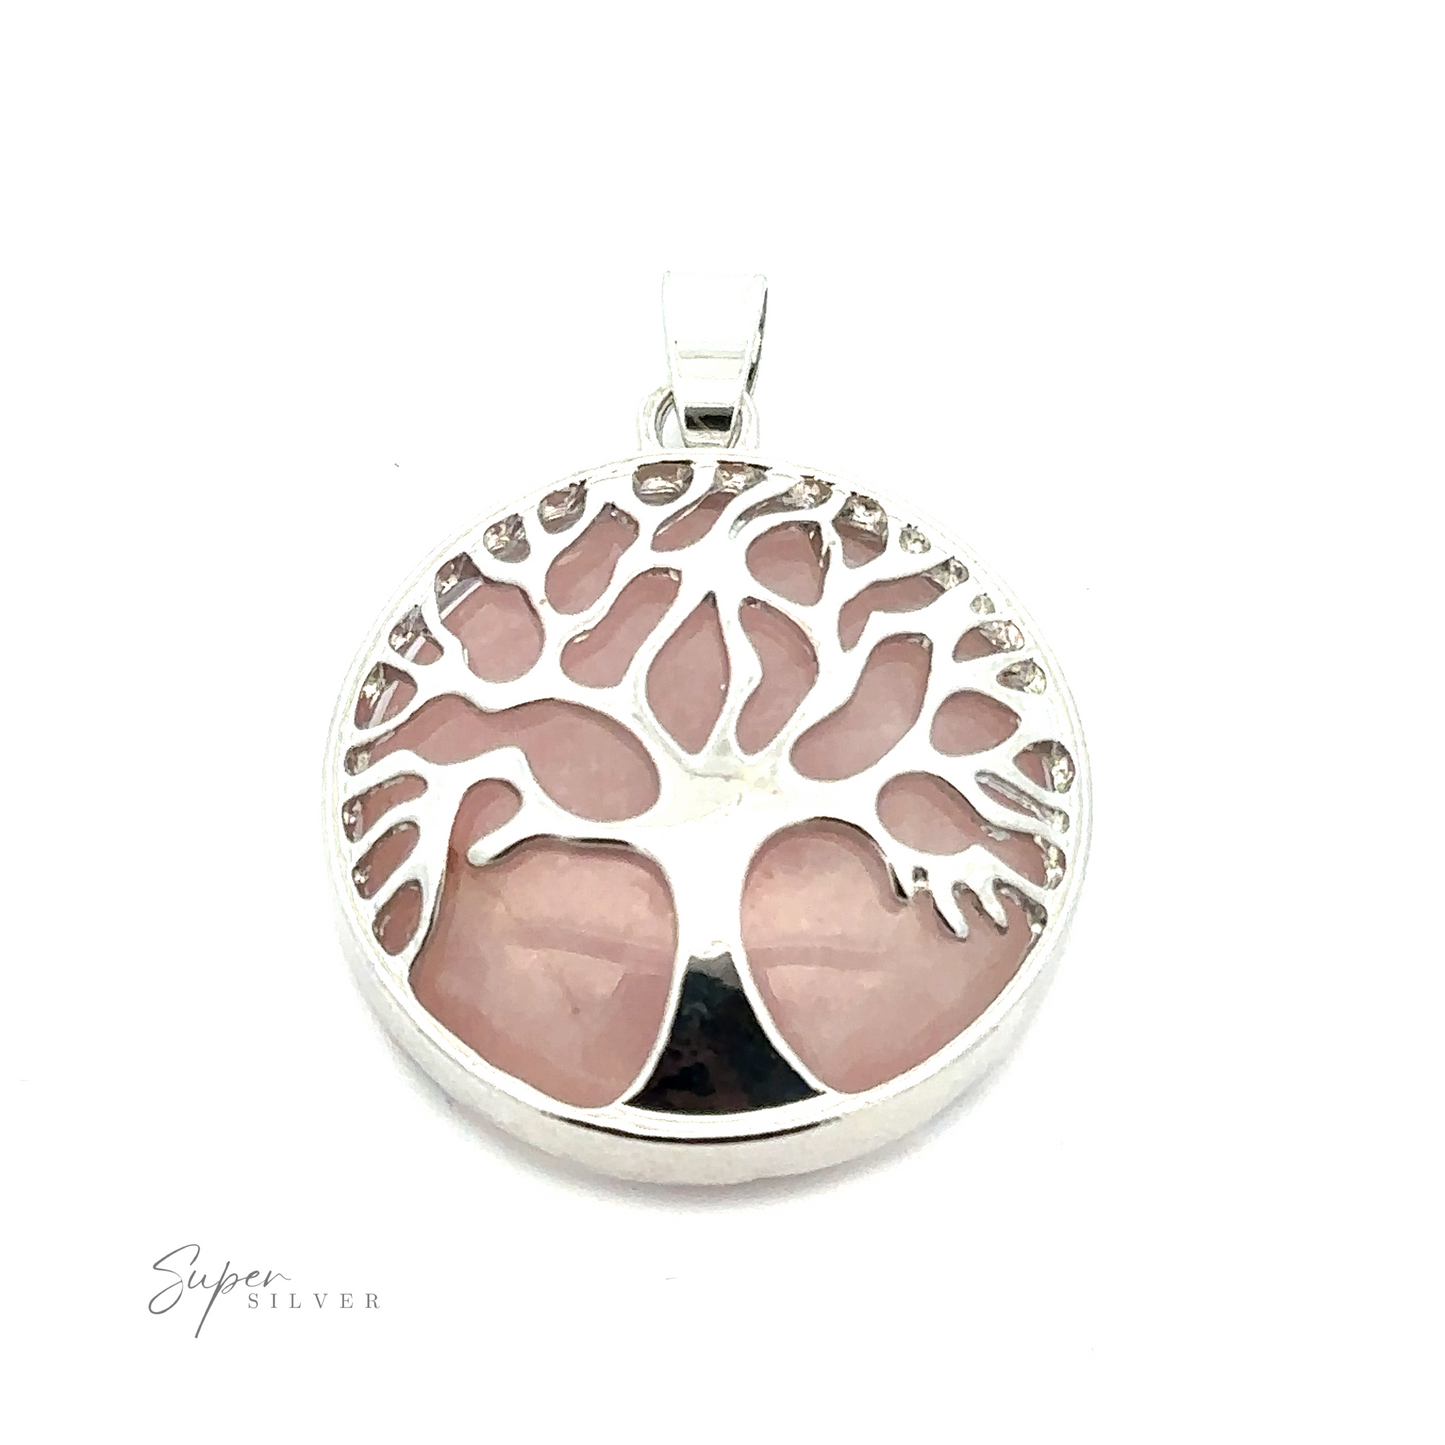 
                  
                    A Tree of Life Pendant featuring a Tree of Life design with branching limbs over a pink gemstone background. The pendant has a small loop for a chain, and the text "Super Silver" is visible on the bottom left.
                  
                